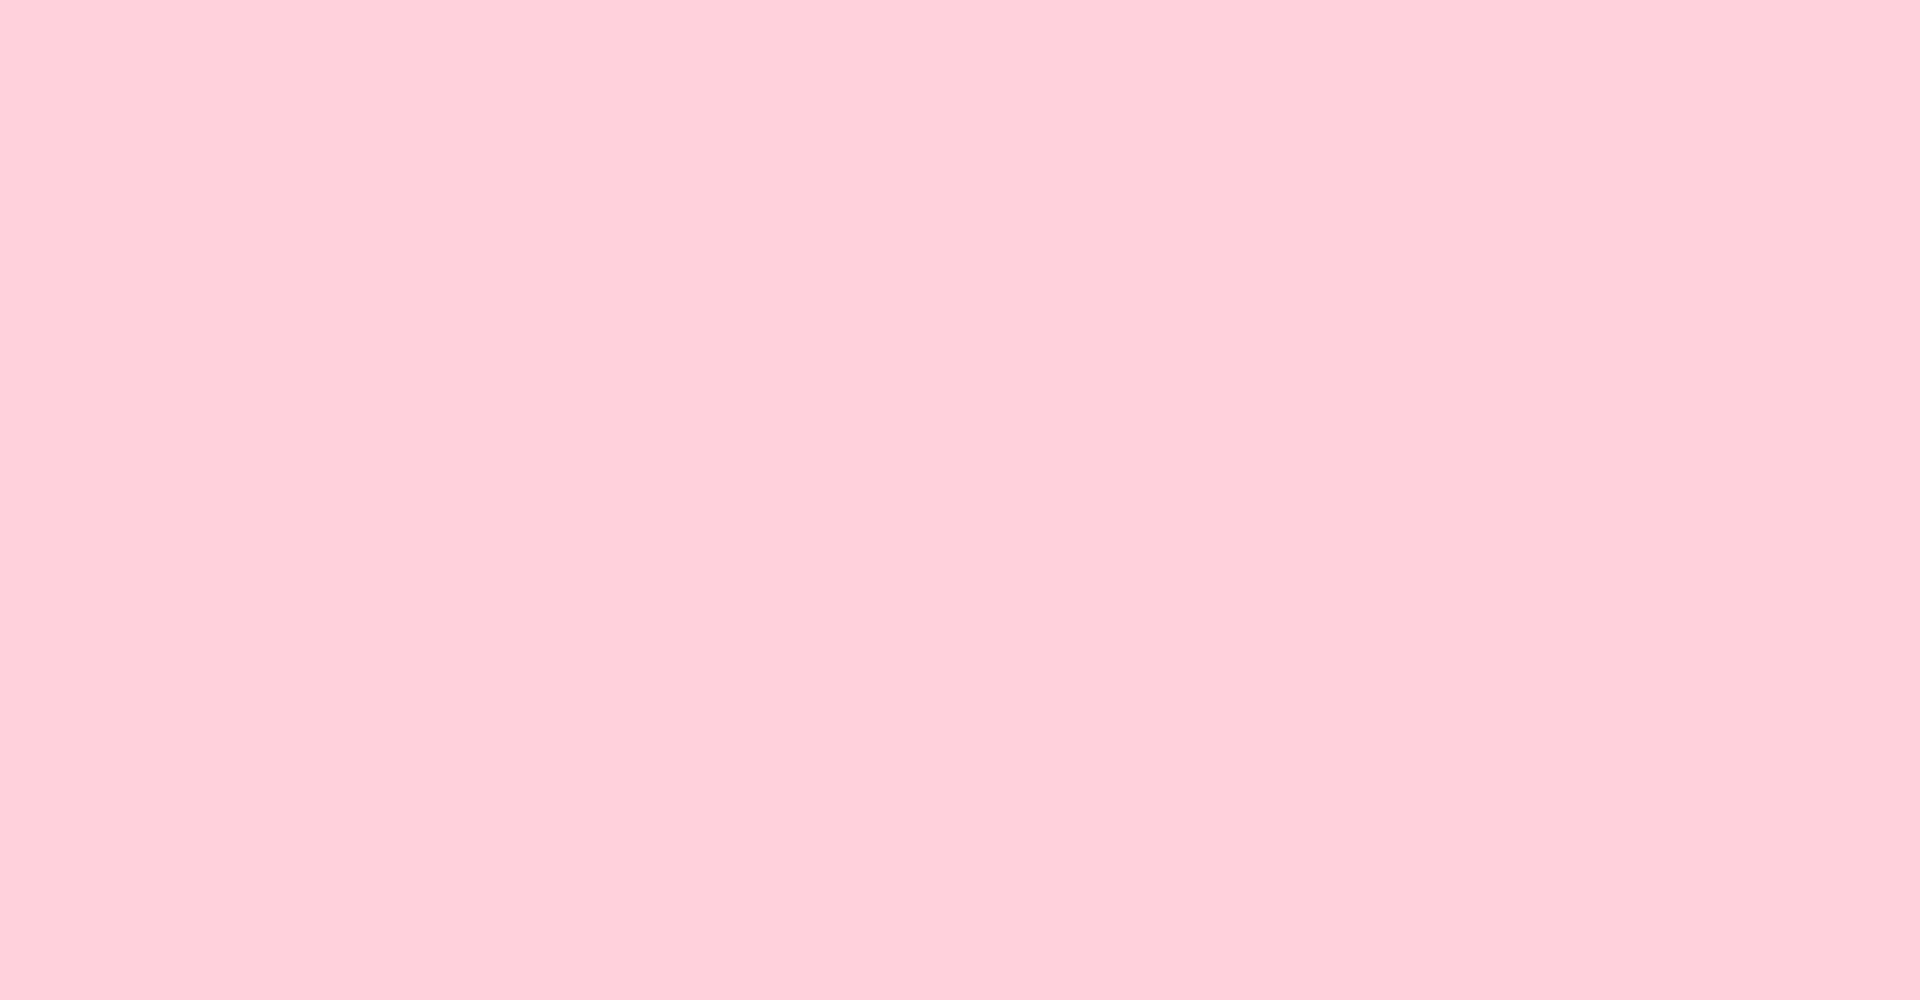 The Color Theory Behind Pink and Its Uses | Simplified